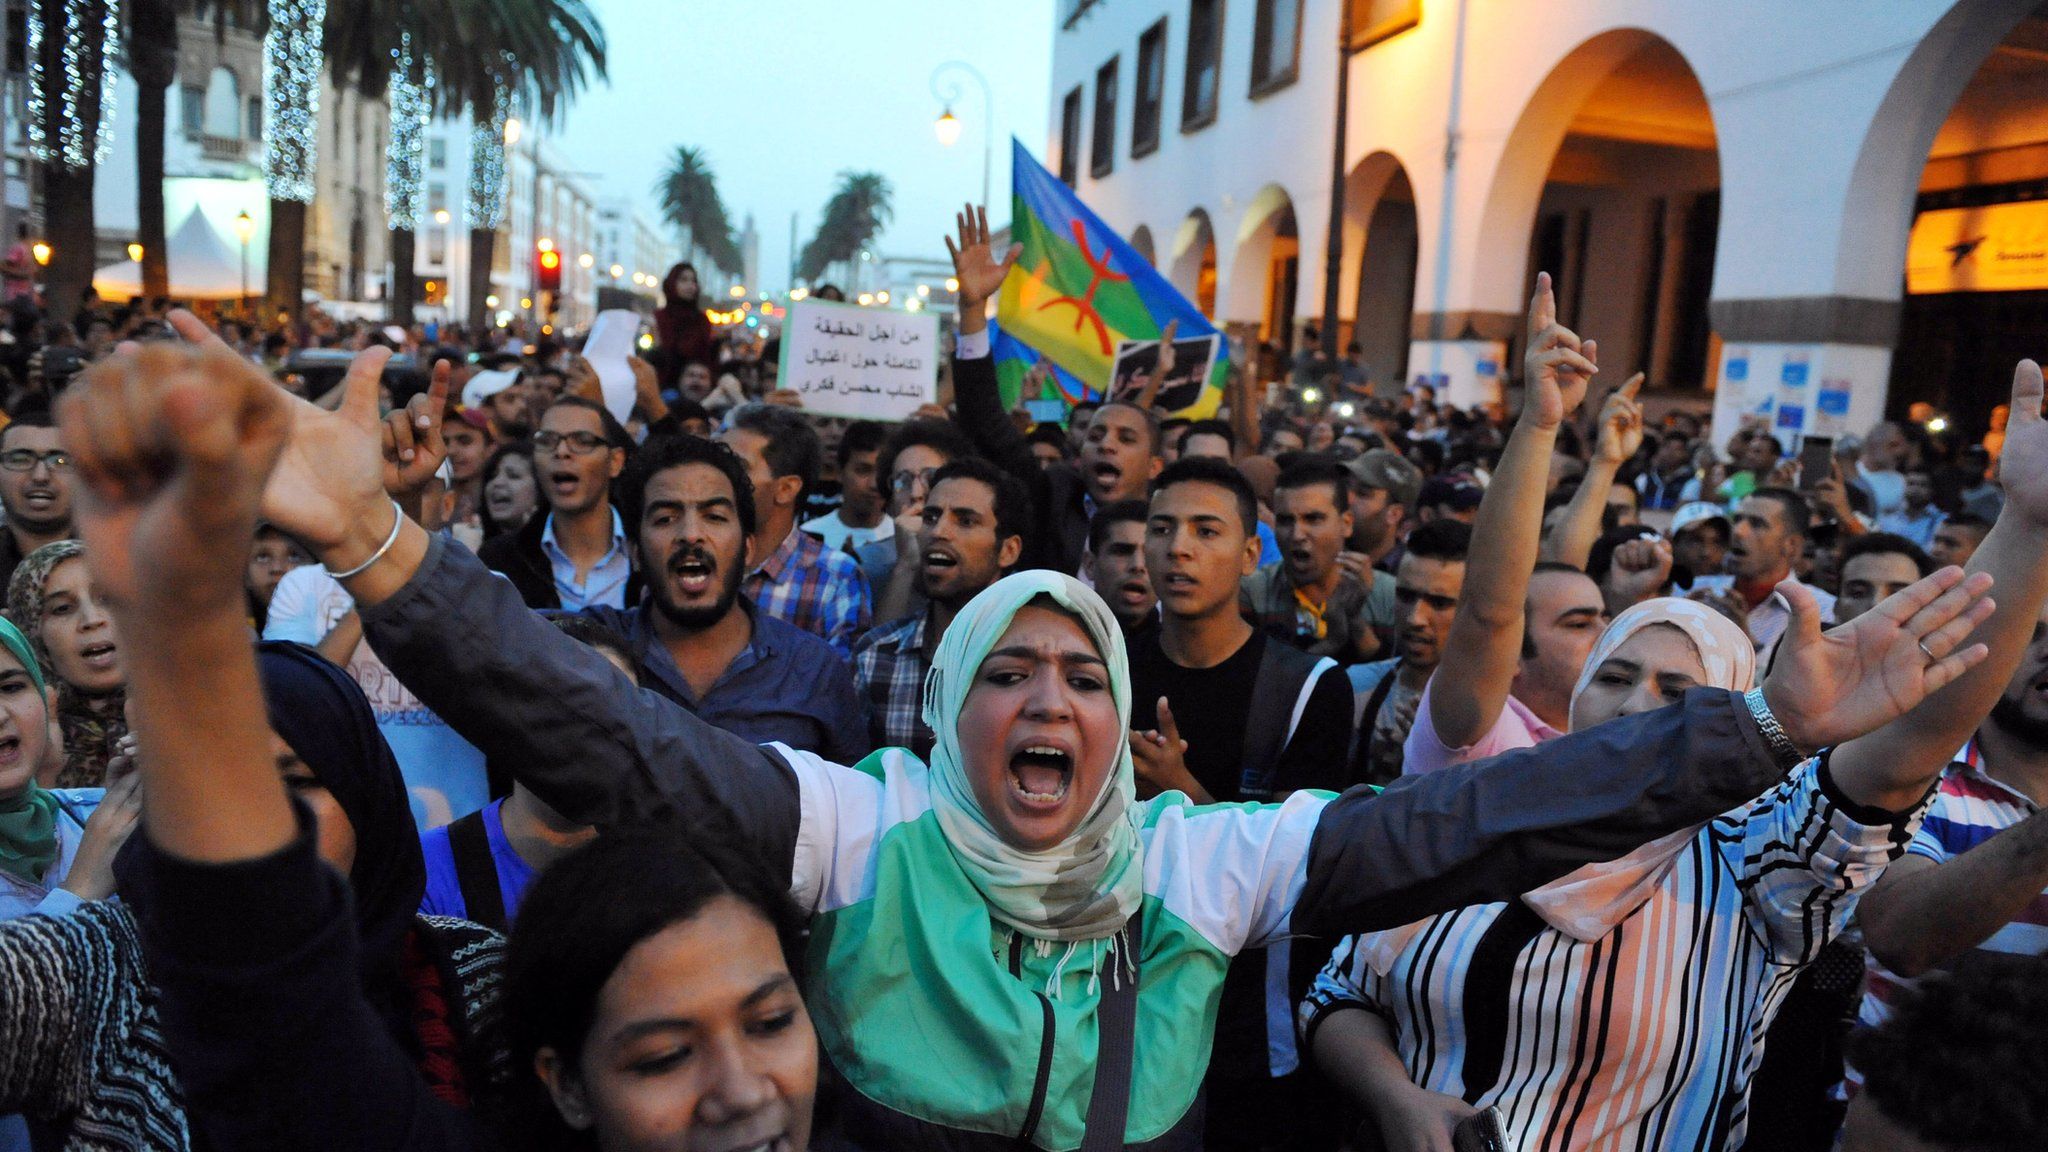 Protest called by the February 20 Movement in Rabat. 30 Oct 2016